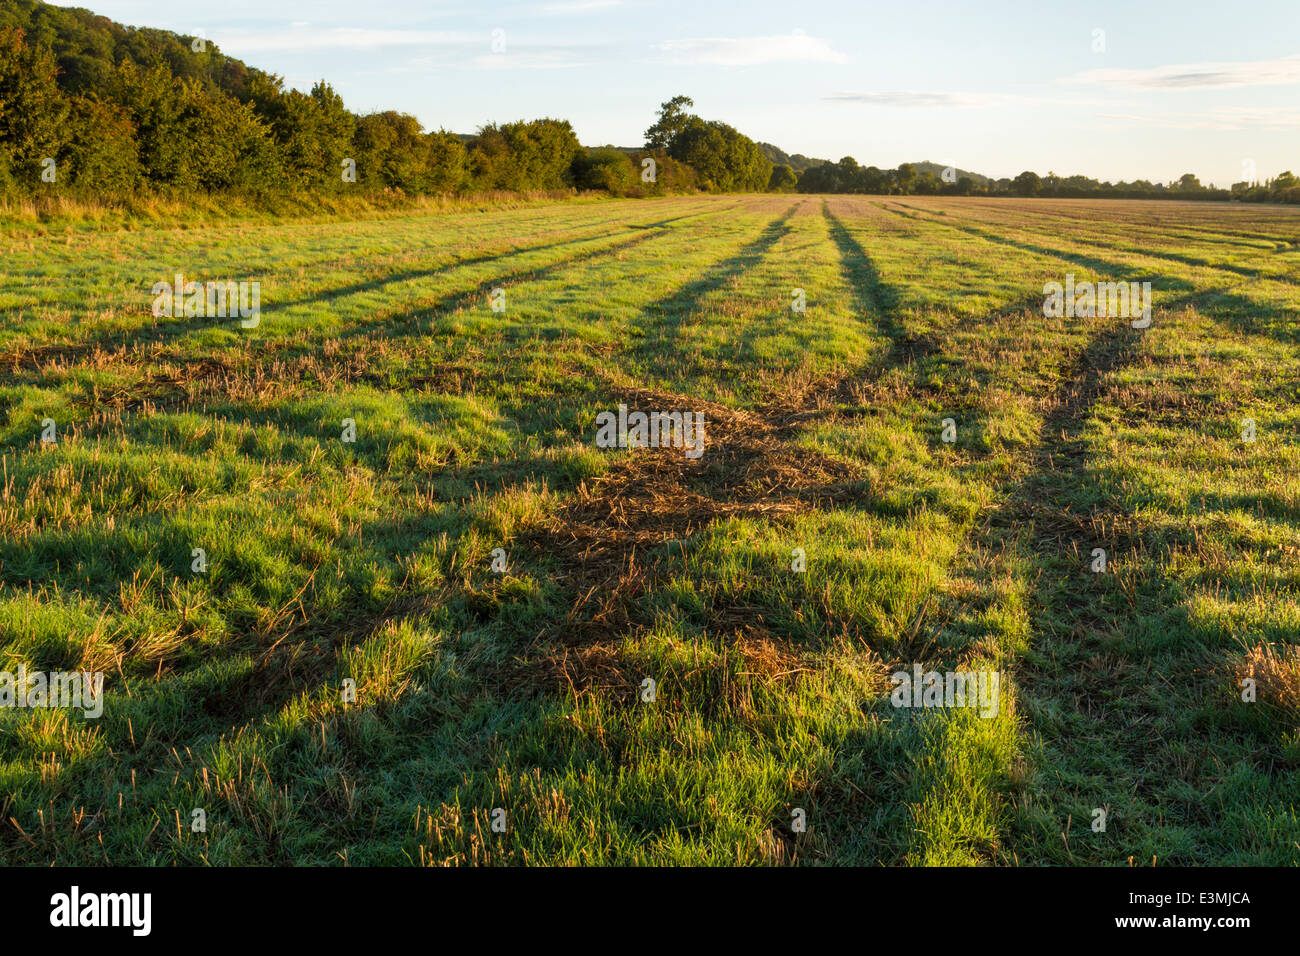 Tyre tracks on a field in early morning sunlight. Tyre or tire marks from the use of agricultural machinery on farmland, Nottinghamshire, England, UK Stock Photo